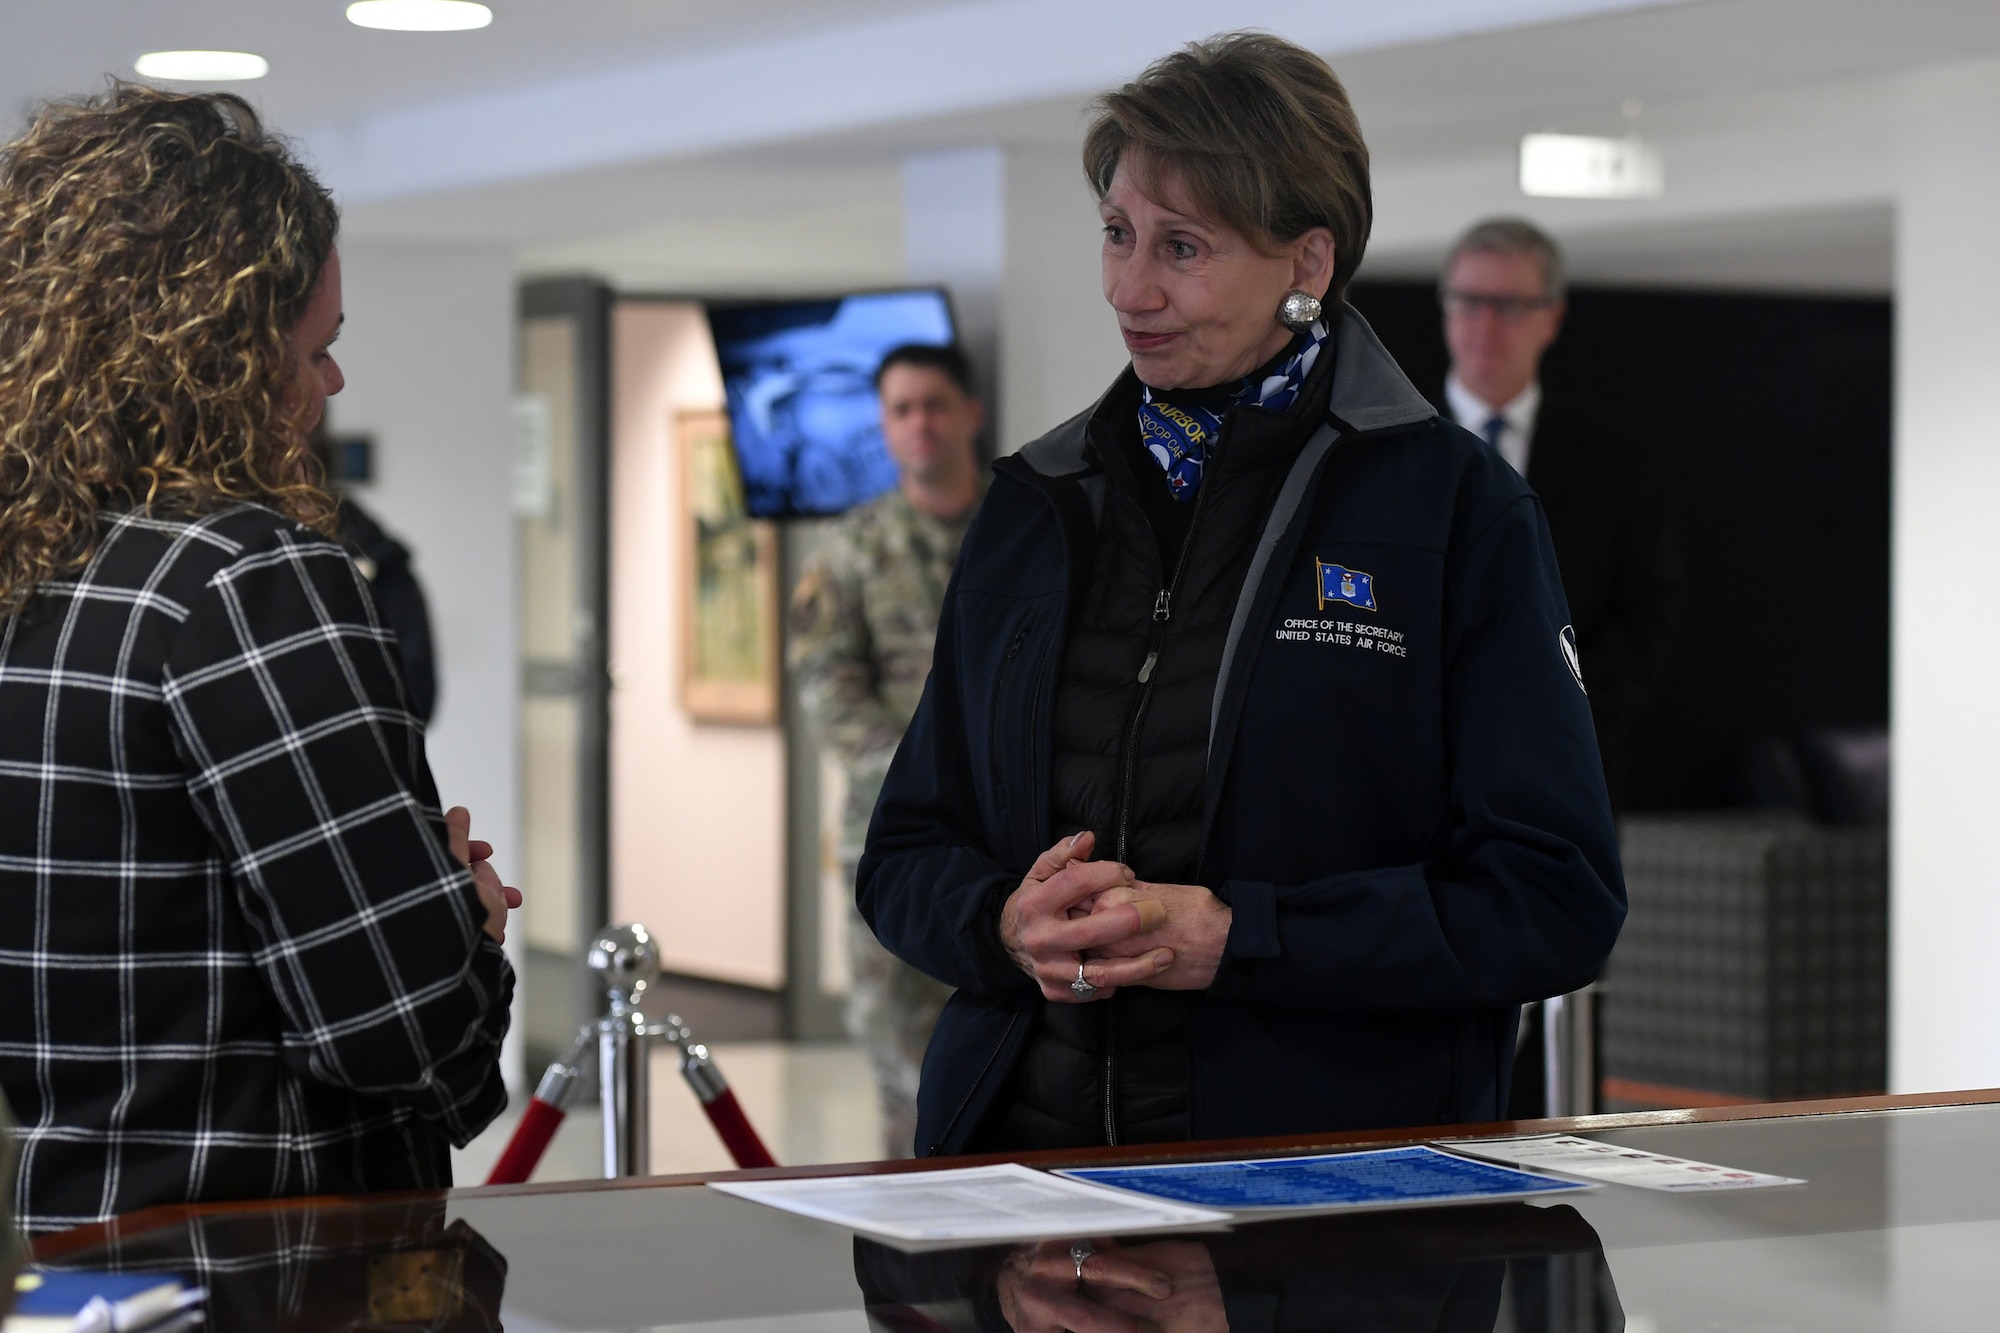 Ms. Krystal Shiver, U.S. Air Forces in Europe and Air Forces Africa chief of integrated resiliency division, briefs Secretary of the Air Force Barbara M. Barrett about Operation GRIT during a visit to headquarters USAFE-AFAFRICA, Ramstein Air Base, Germany, Nov. 22, 2019.